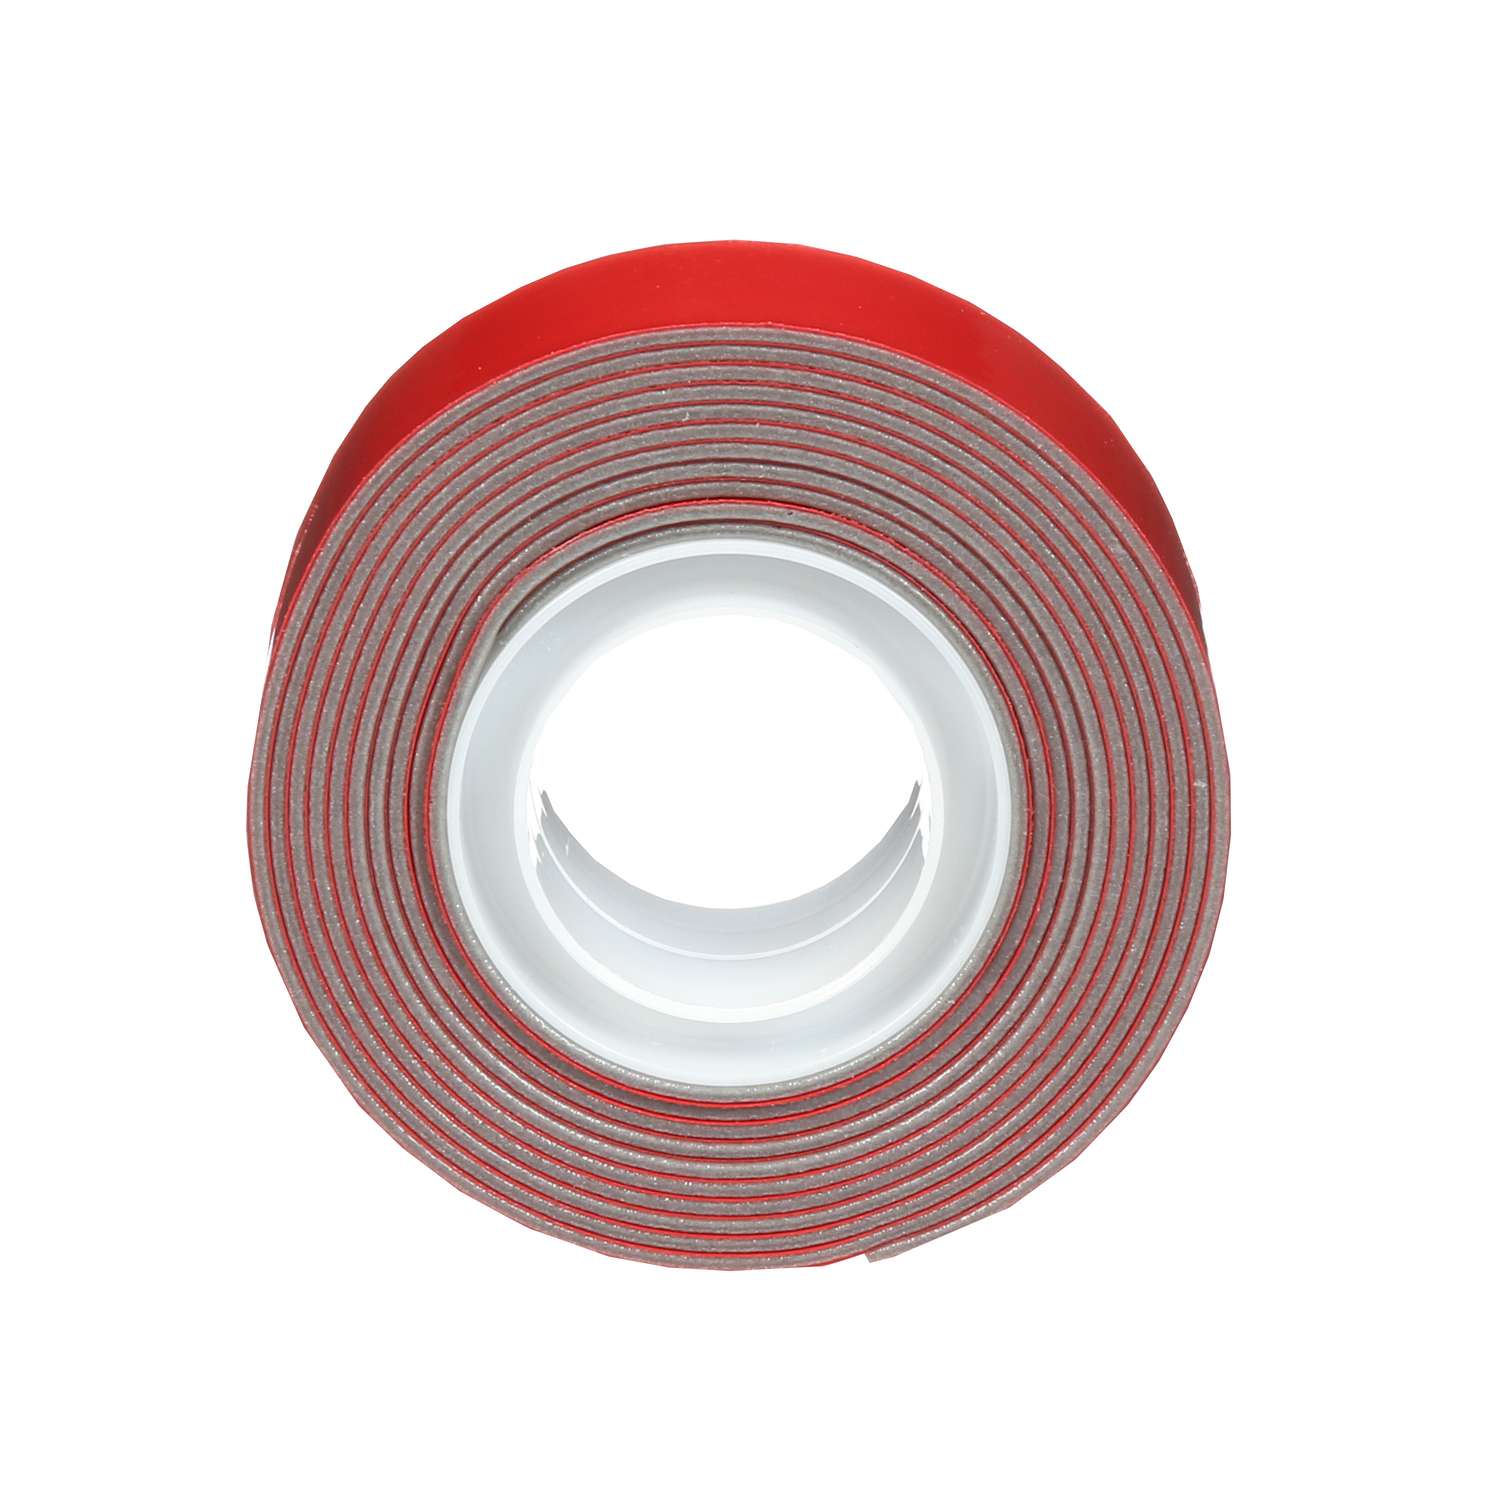  Inc. > Tabs, 3M Tape & Rivets > 3M Adhesive Tape Double-Sided